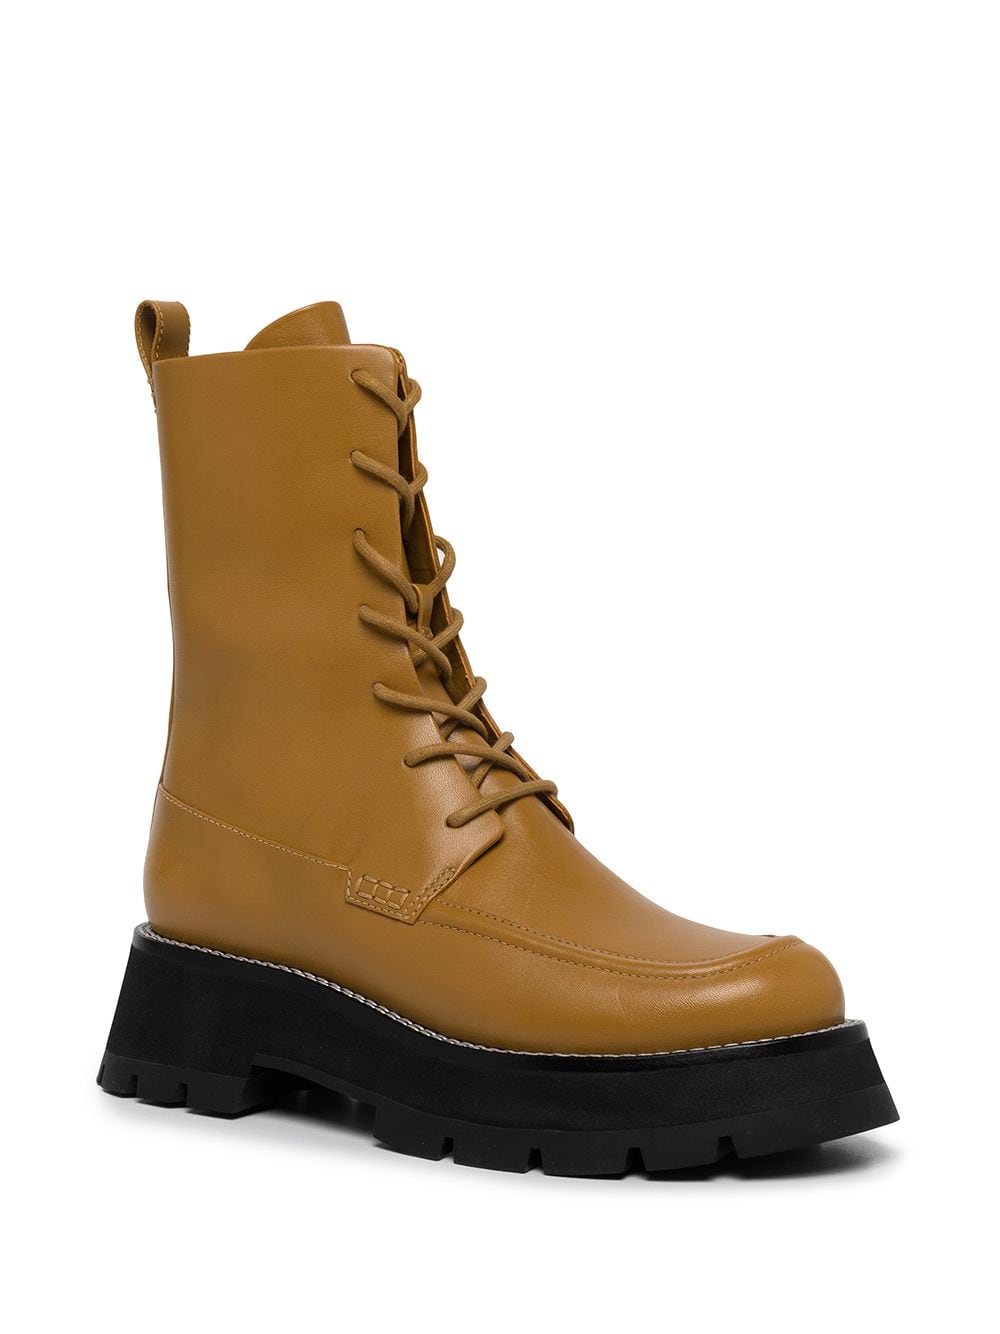 Image 2 of 3.1 Phillip Lim Kate lace-up combat boots